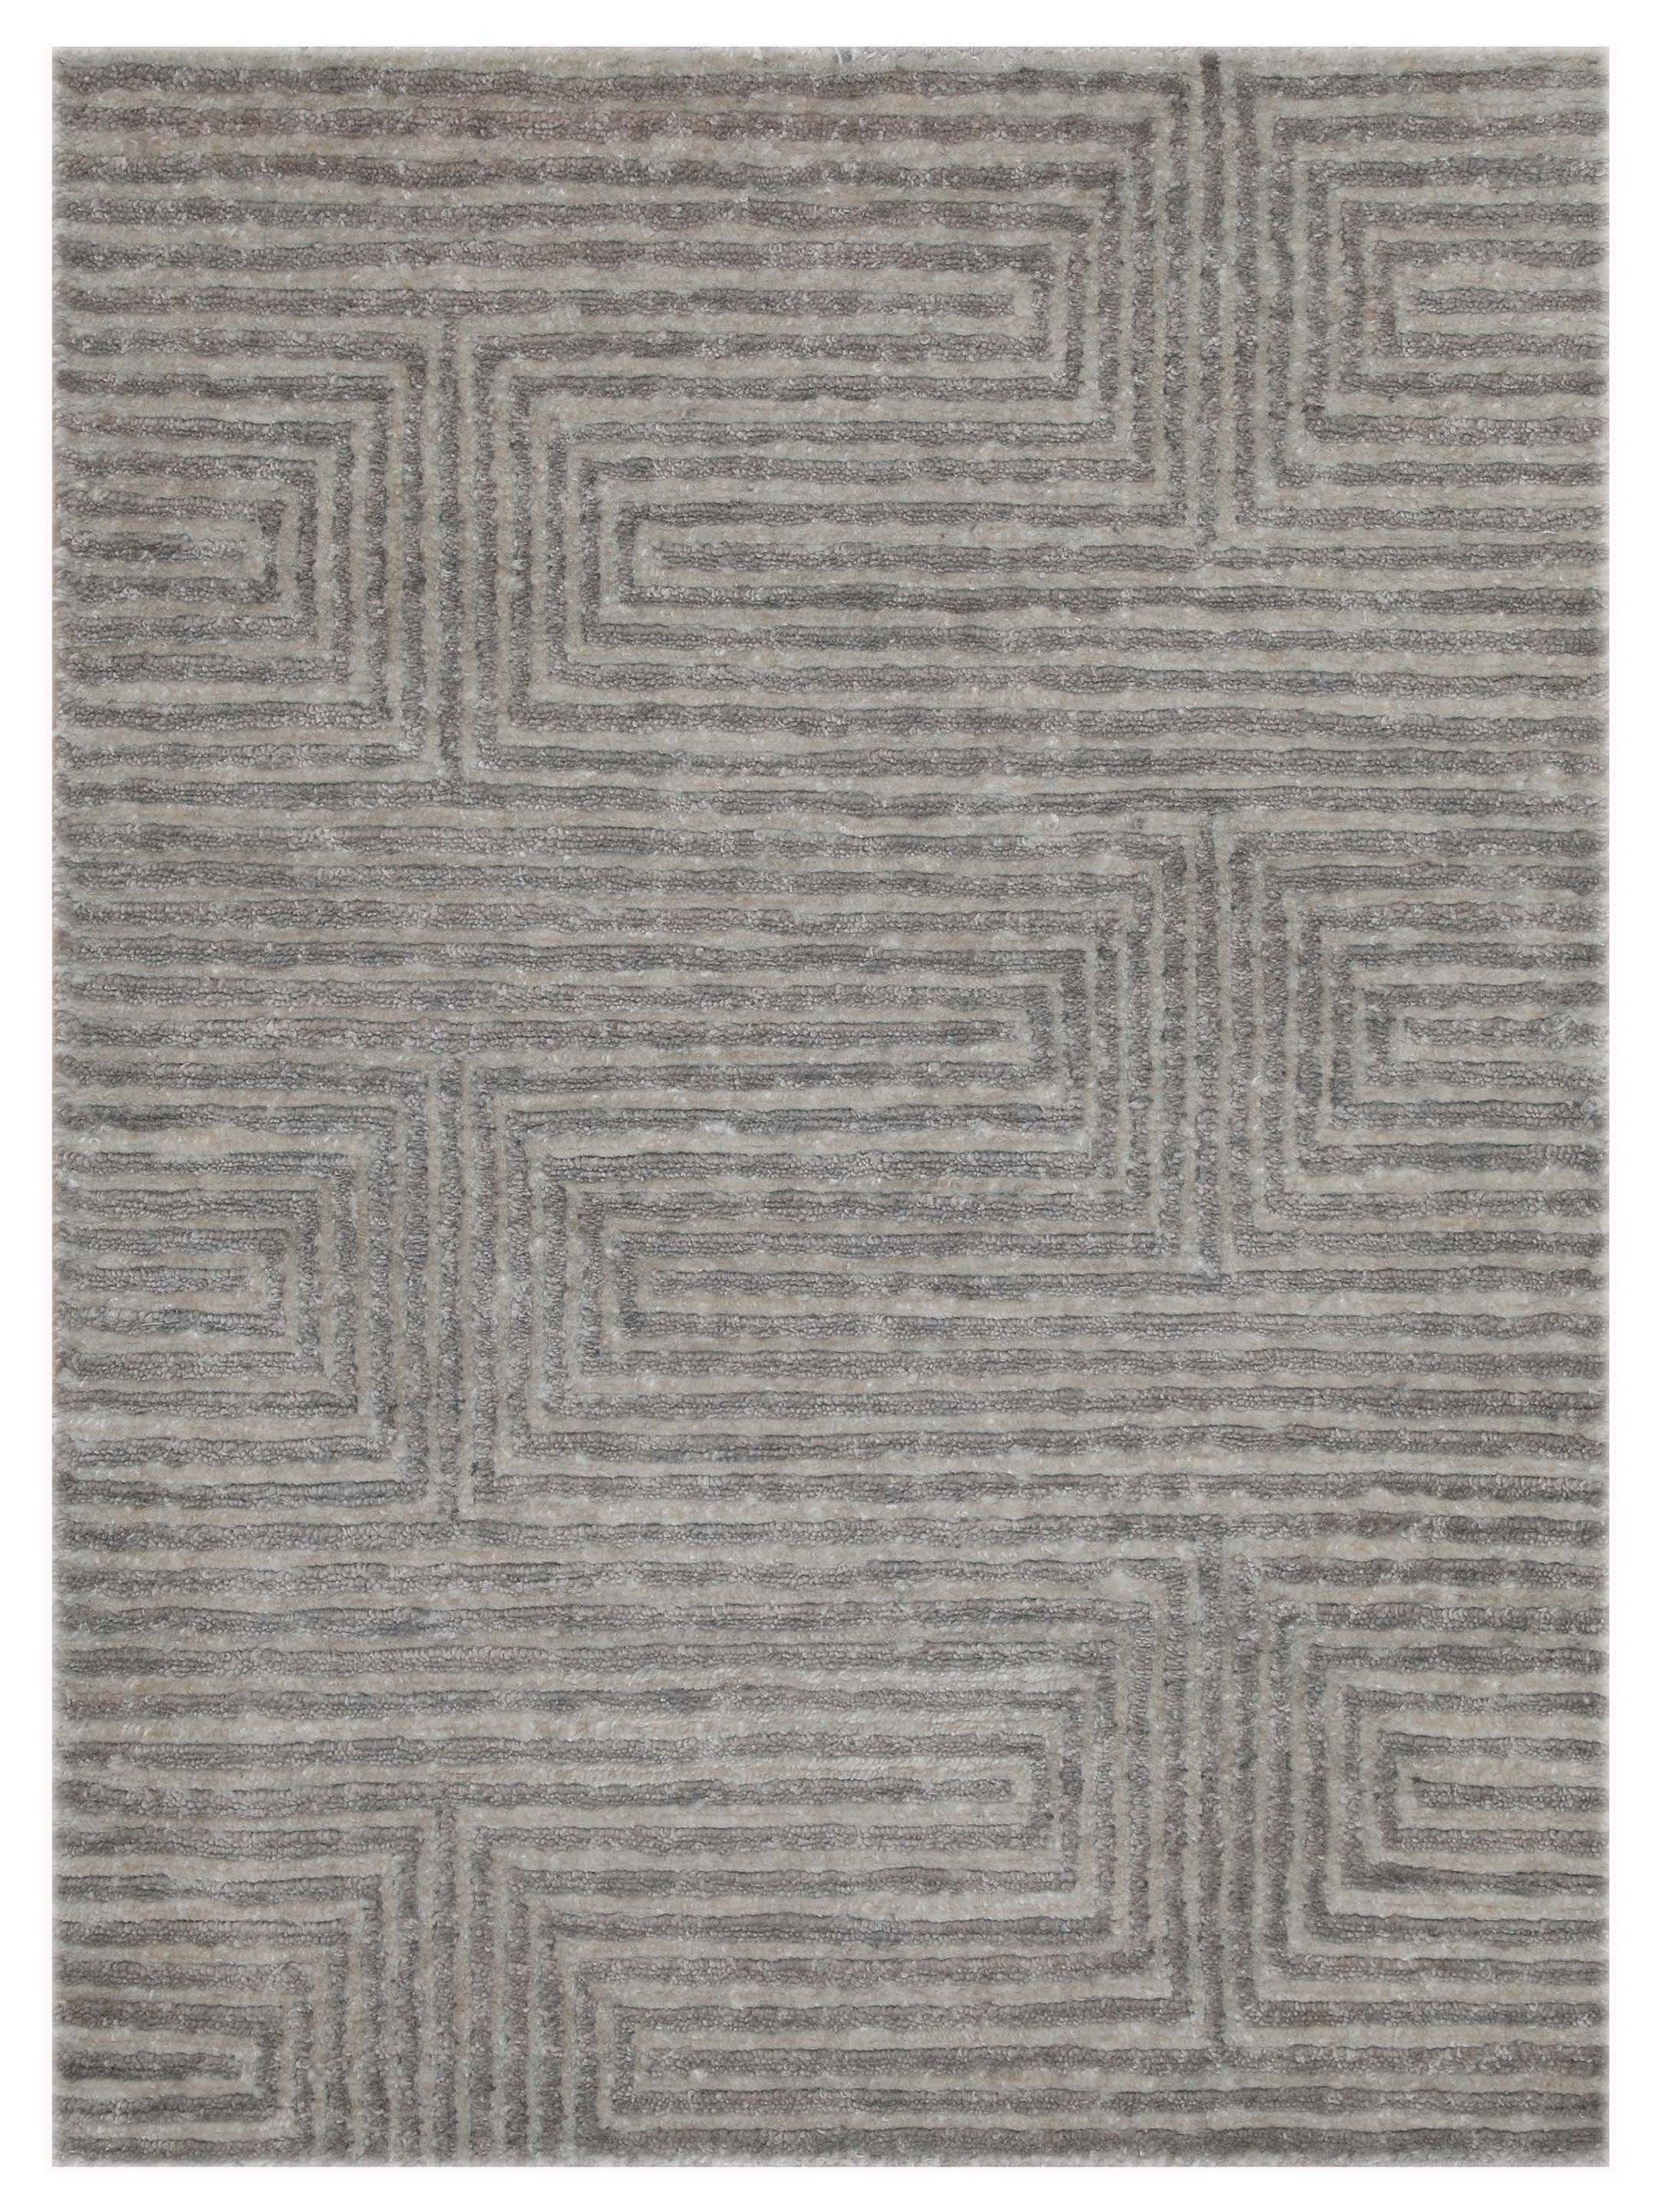 Artisan Mary MN-226 Wheat Contemporary Knotted Rug